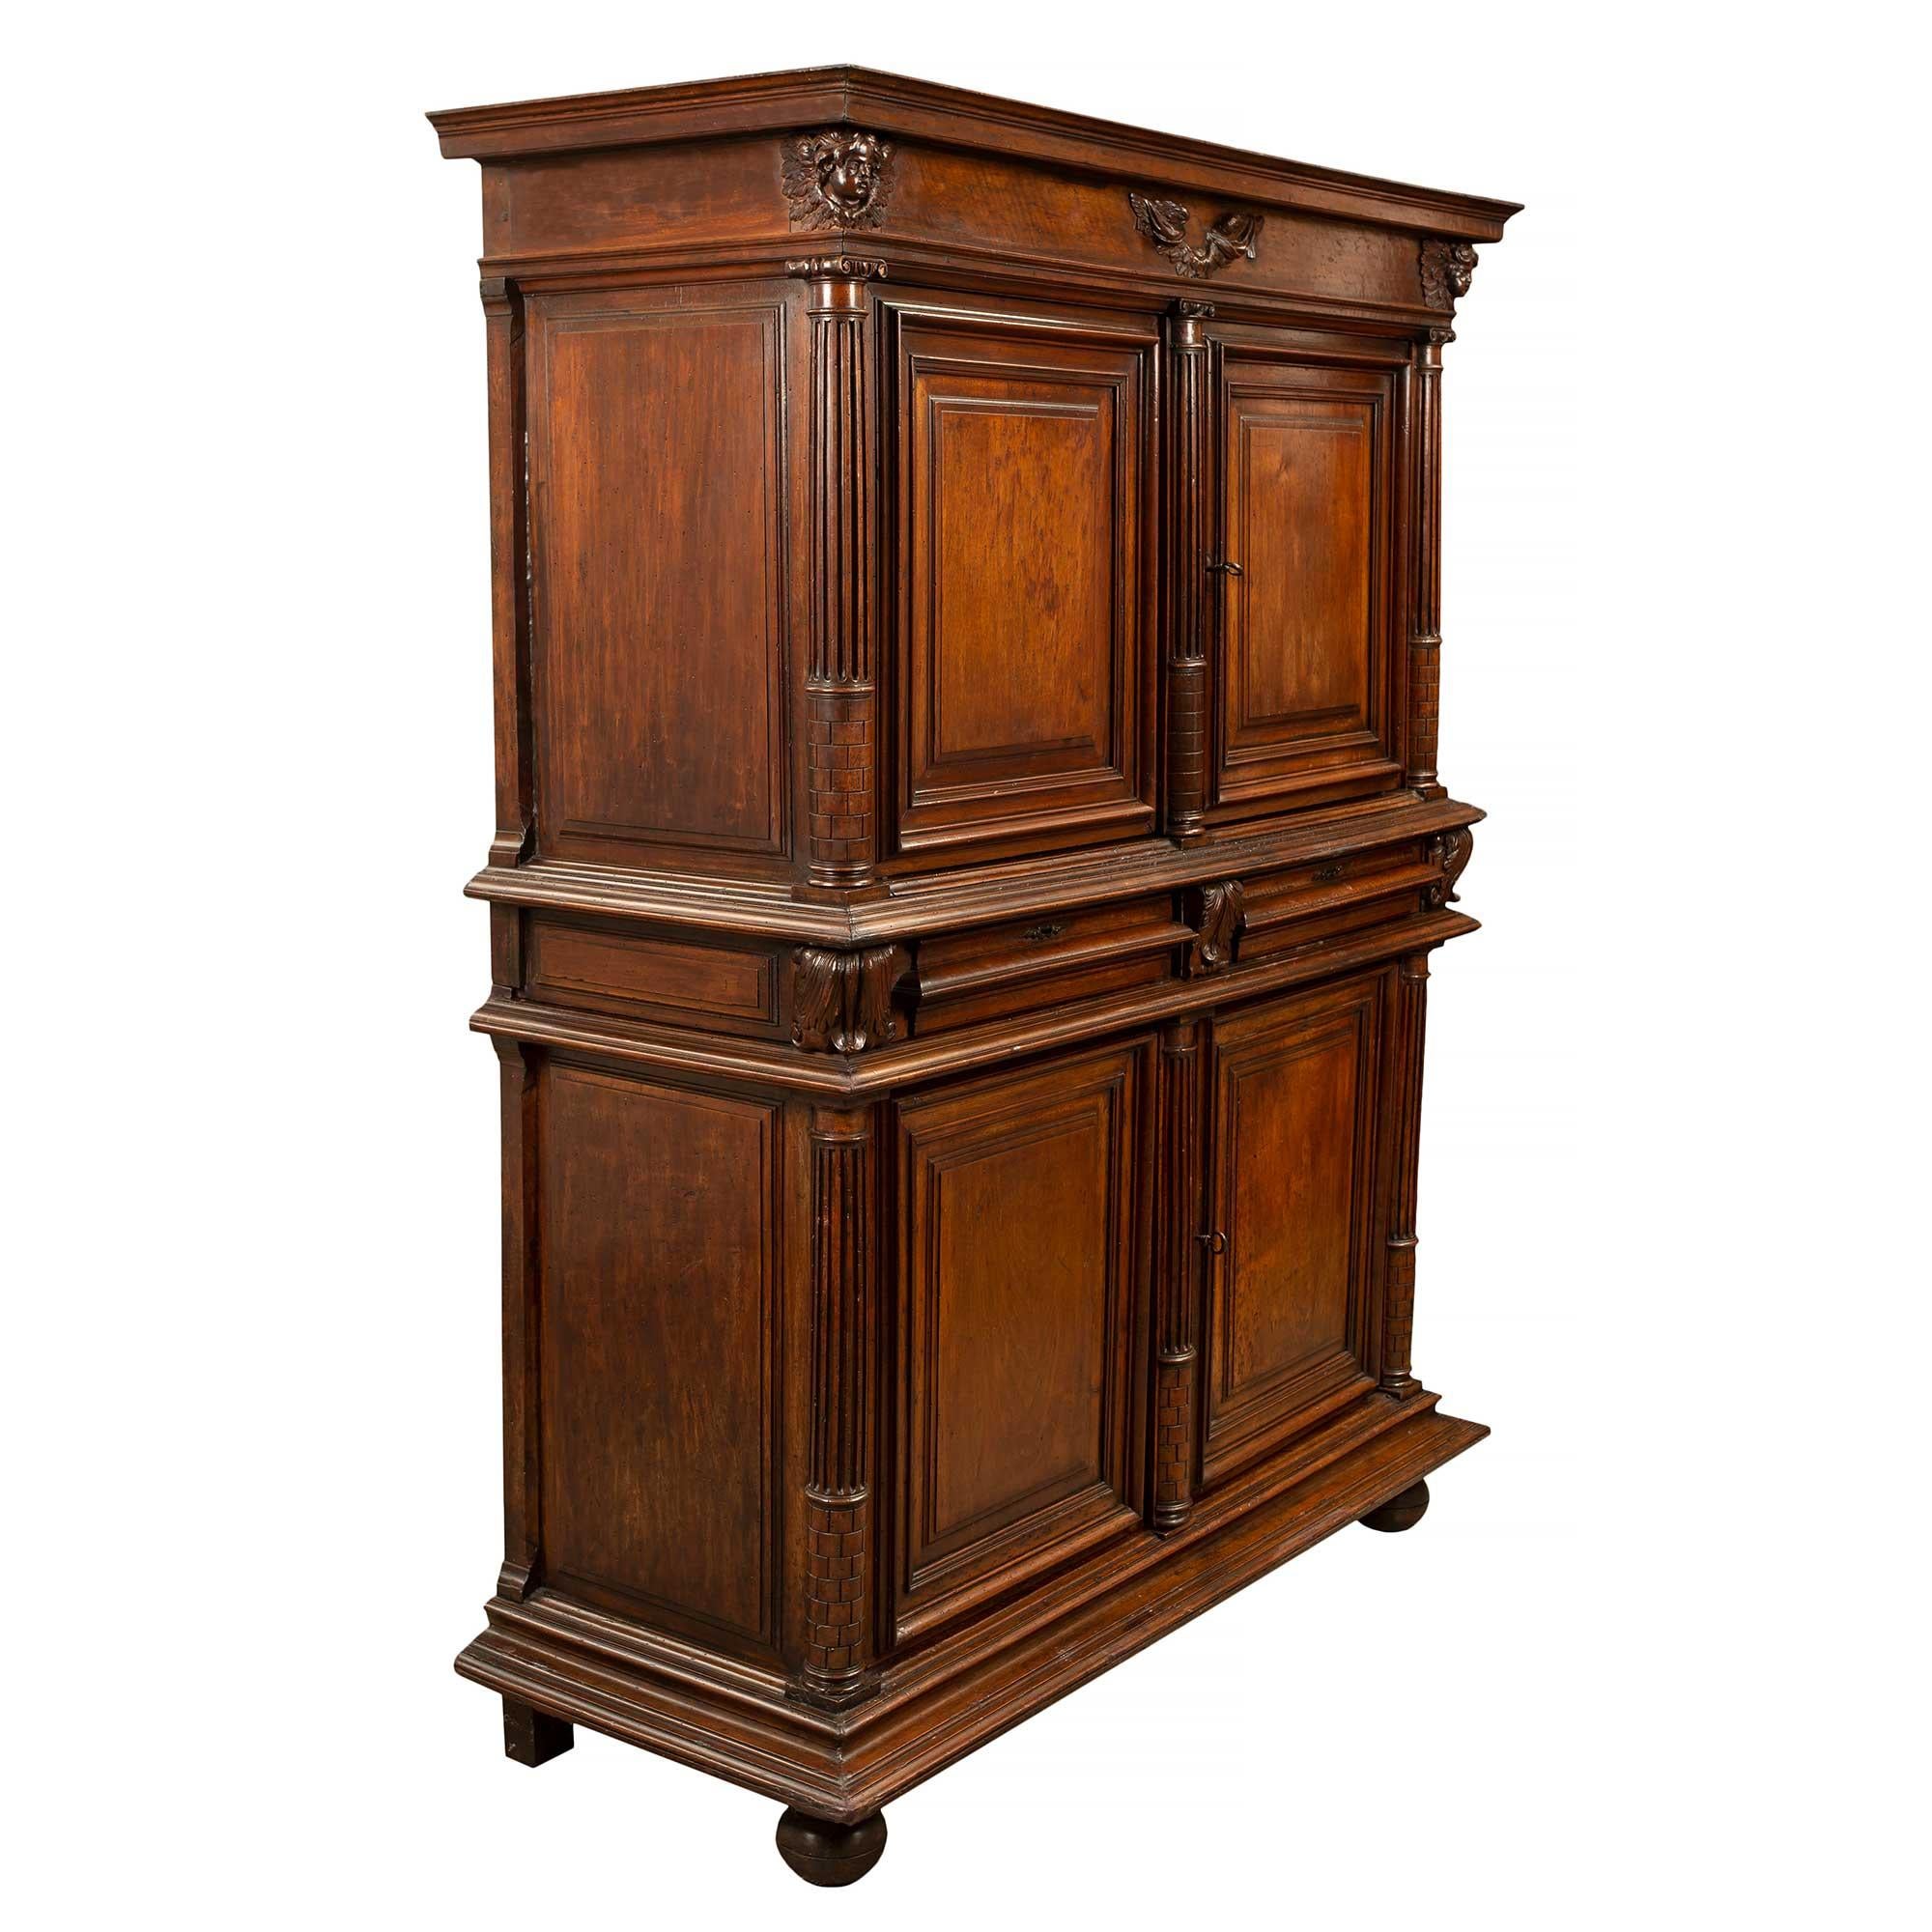  Italian 17th Century Walnut Deux-Corps Armoire In Good Condition For Sale In West Palm Beach, FL